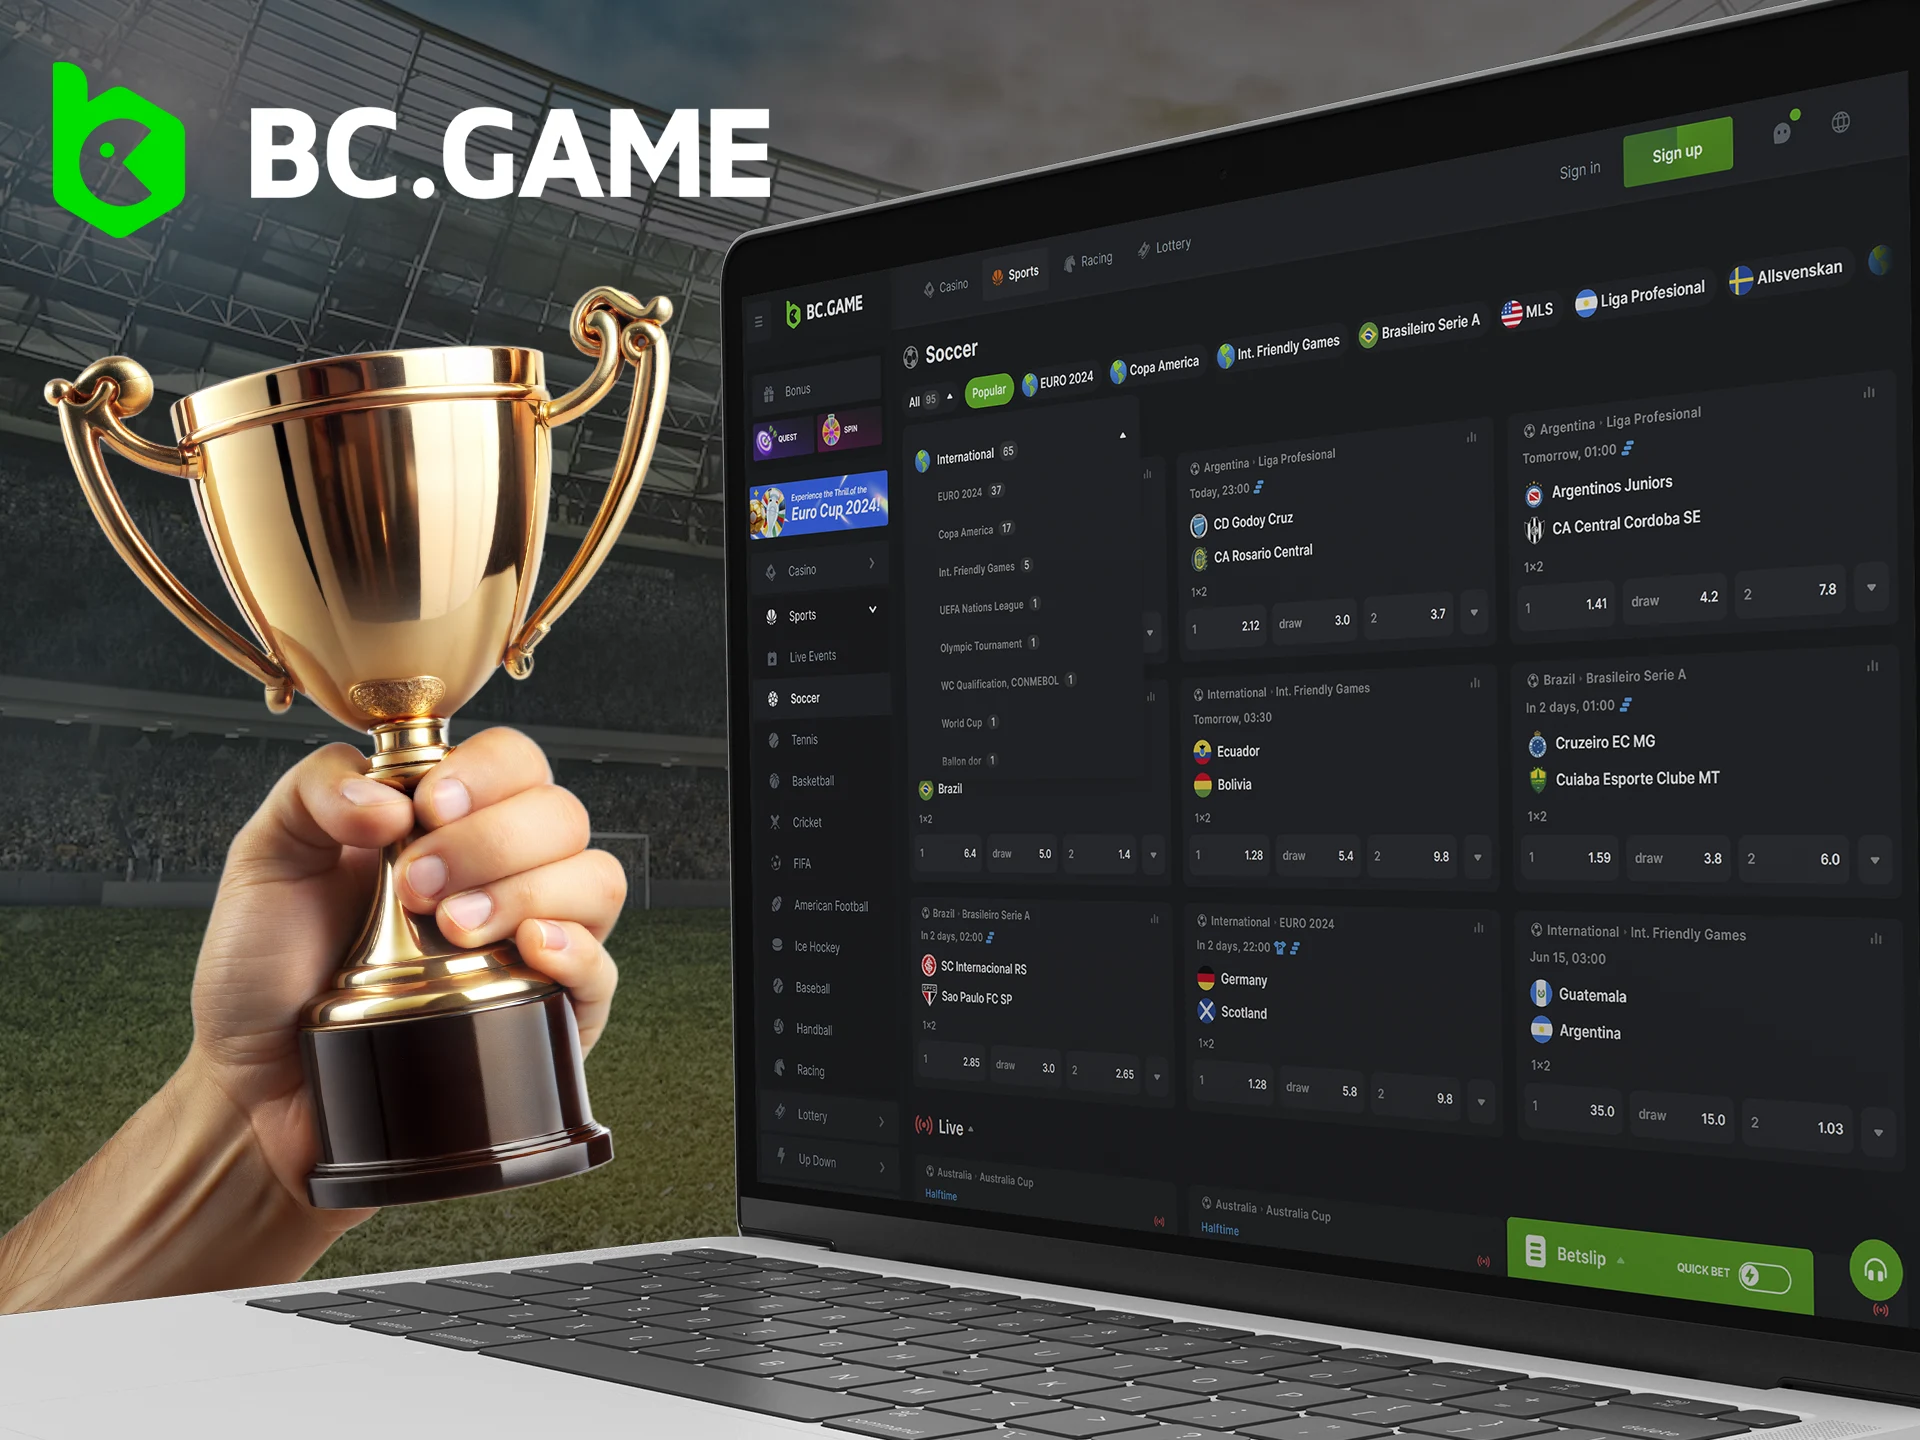 BC Game offers a large selection of football tournaments to bet on.